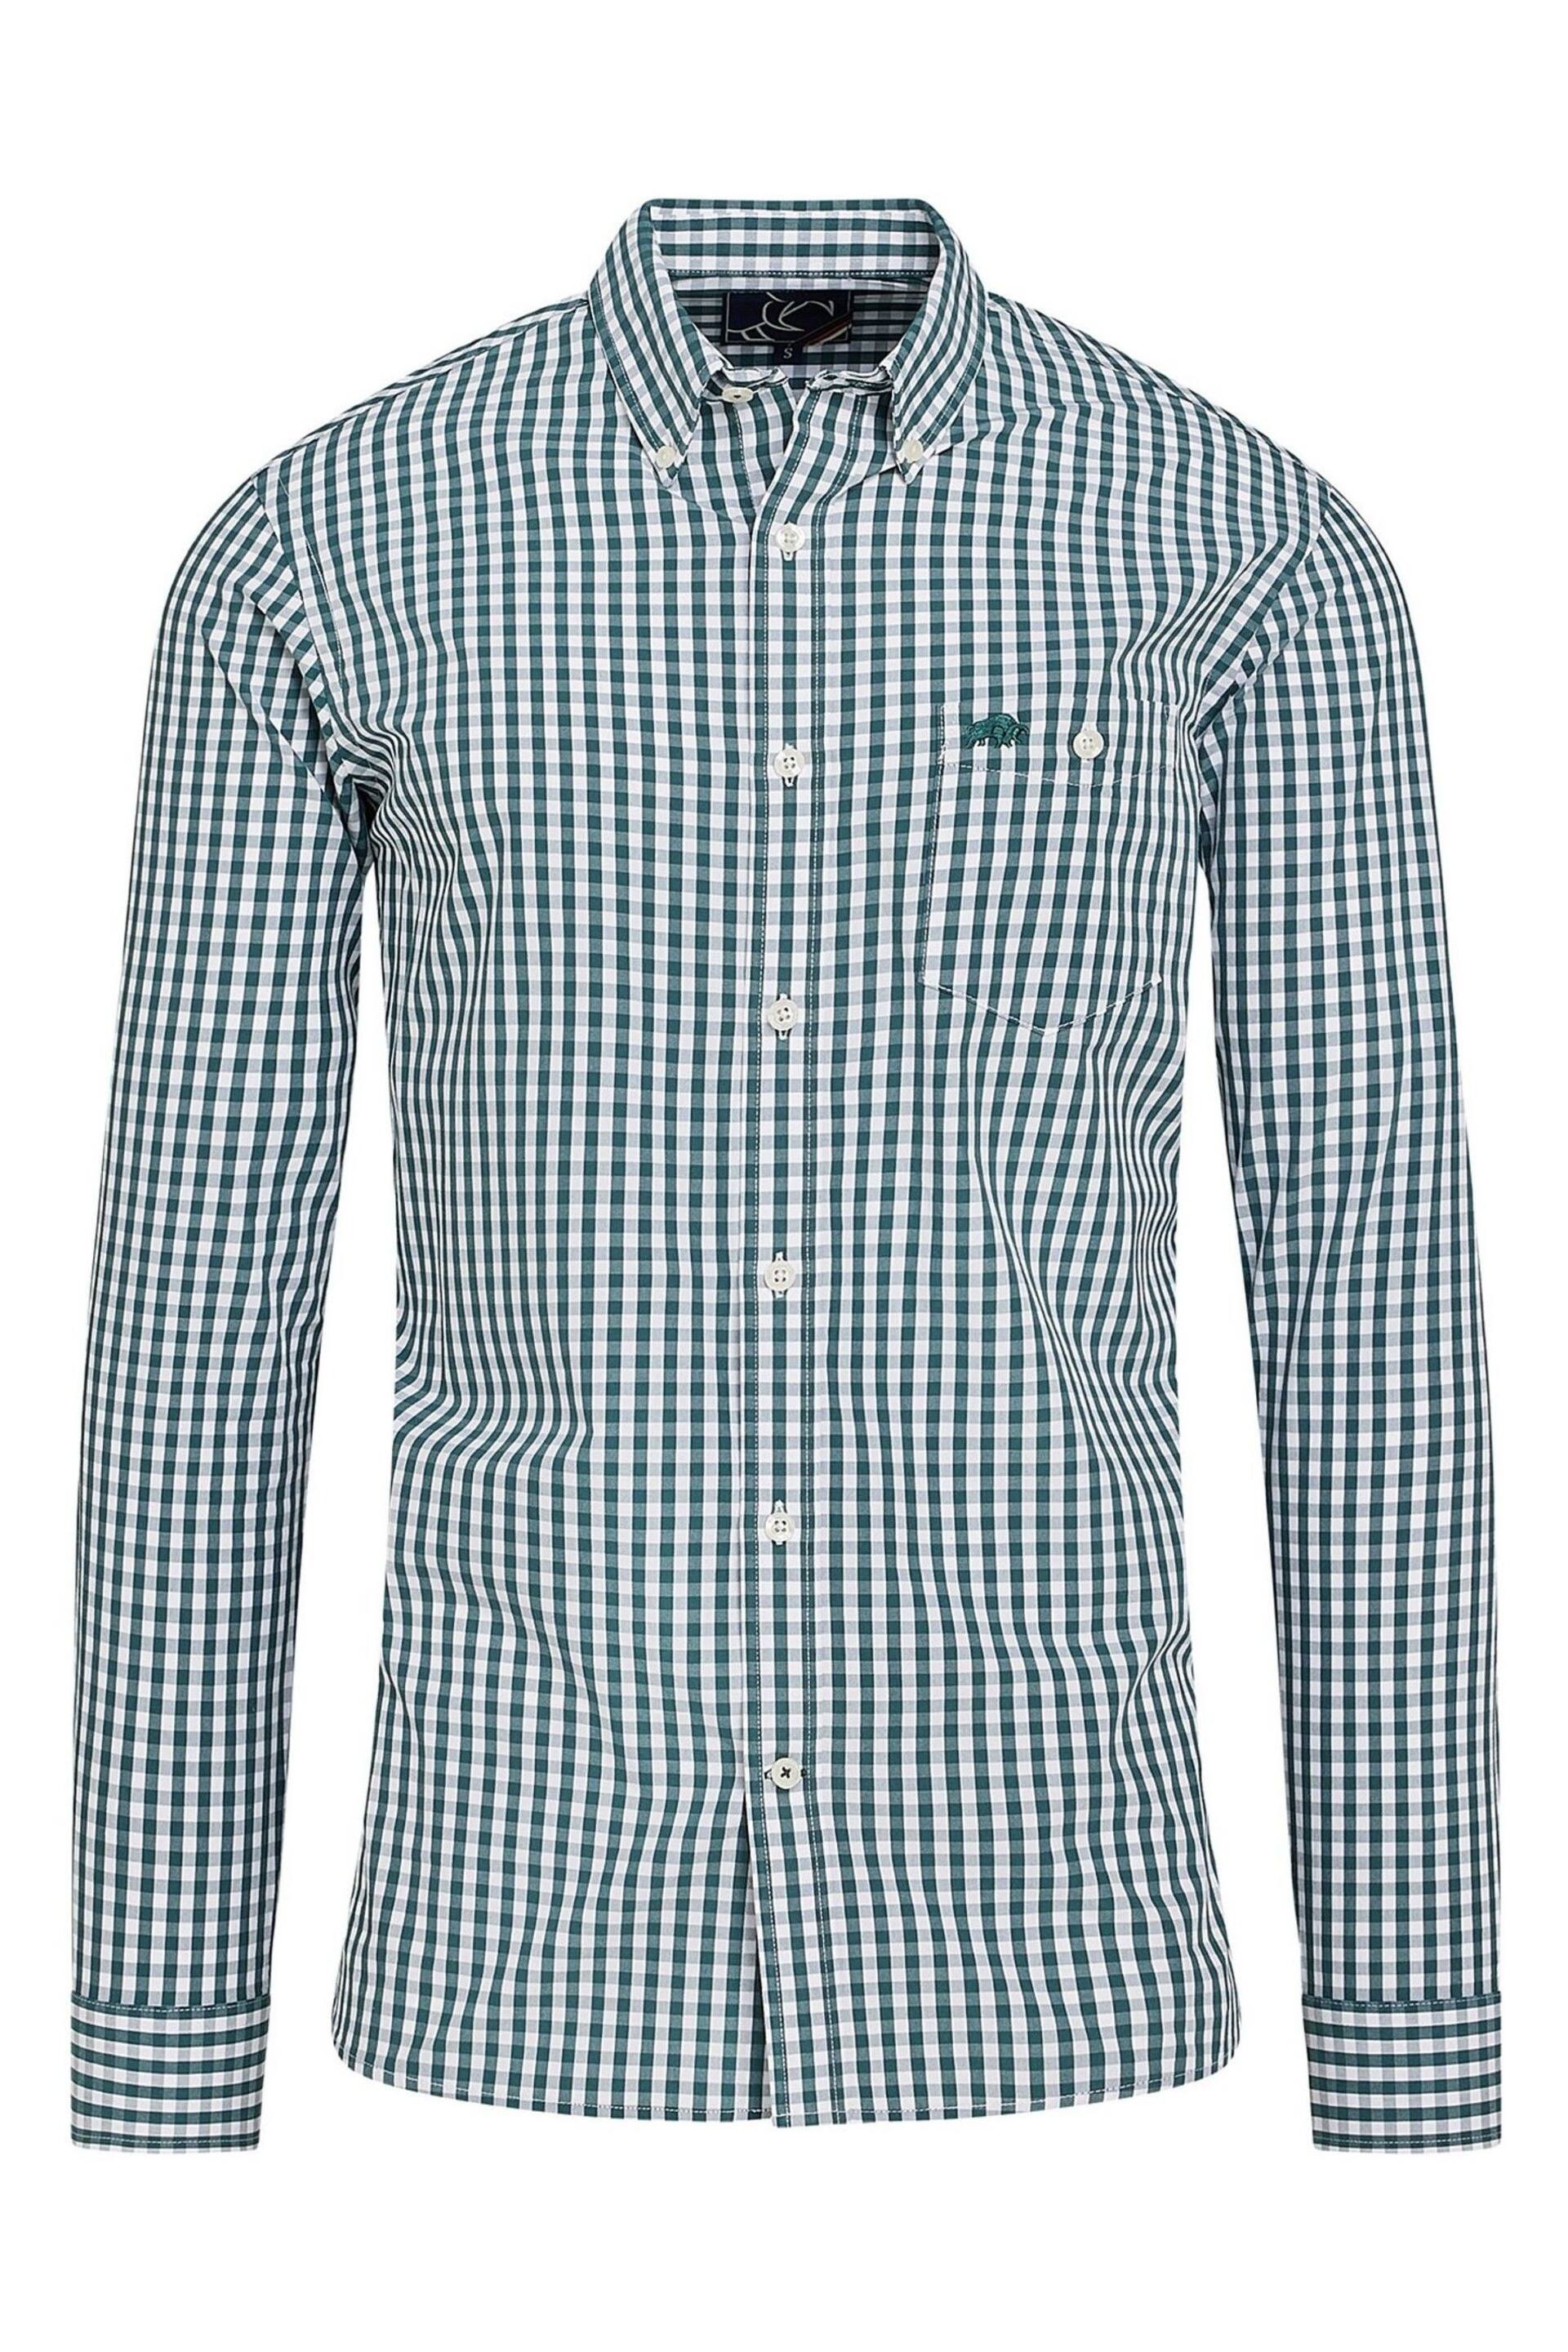 Long Sleeve Green Classic Gingham Shirt - Image 6 of 7